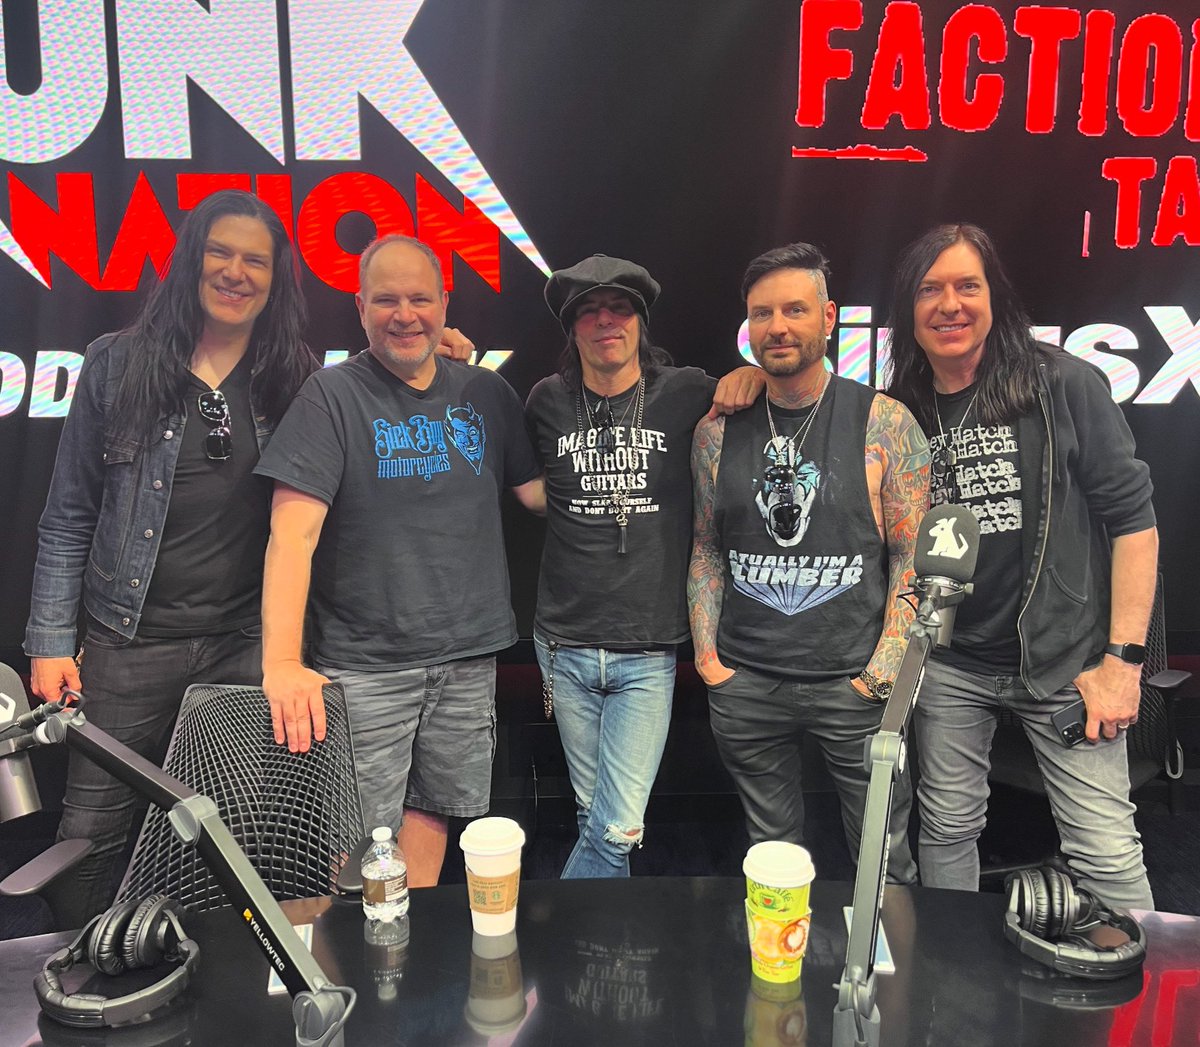 Canadian mayhem today on @TrunkNationSXM ! Thx to @todddammitkerns @jasonhook03 @brentfitz @stacey_blades for joining me today talking Canada rock. Many great calls too. Now on @SIRIUSXM app if you missed it. Replays tonight 9P PT on 103. Tomorrow @tonyiommi ! #trunknation